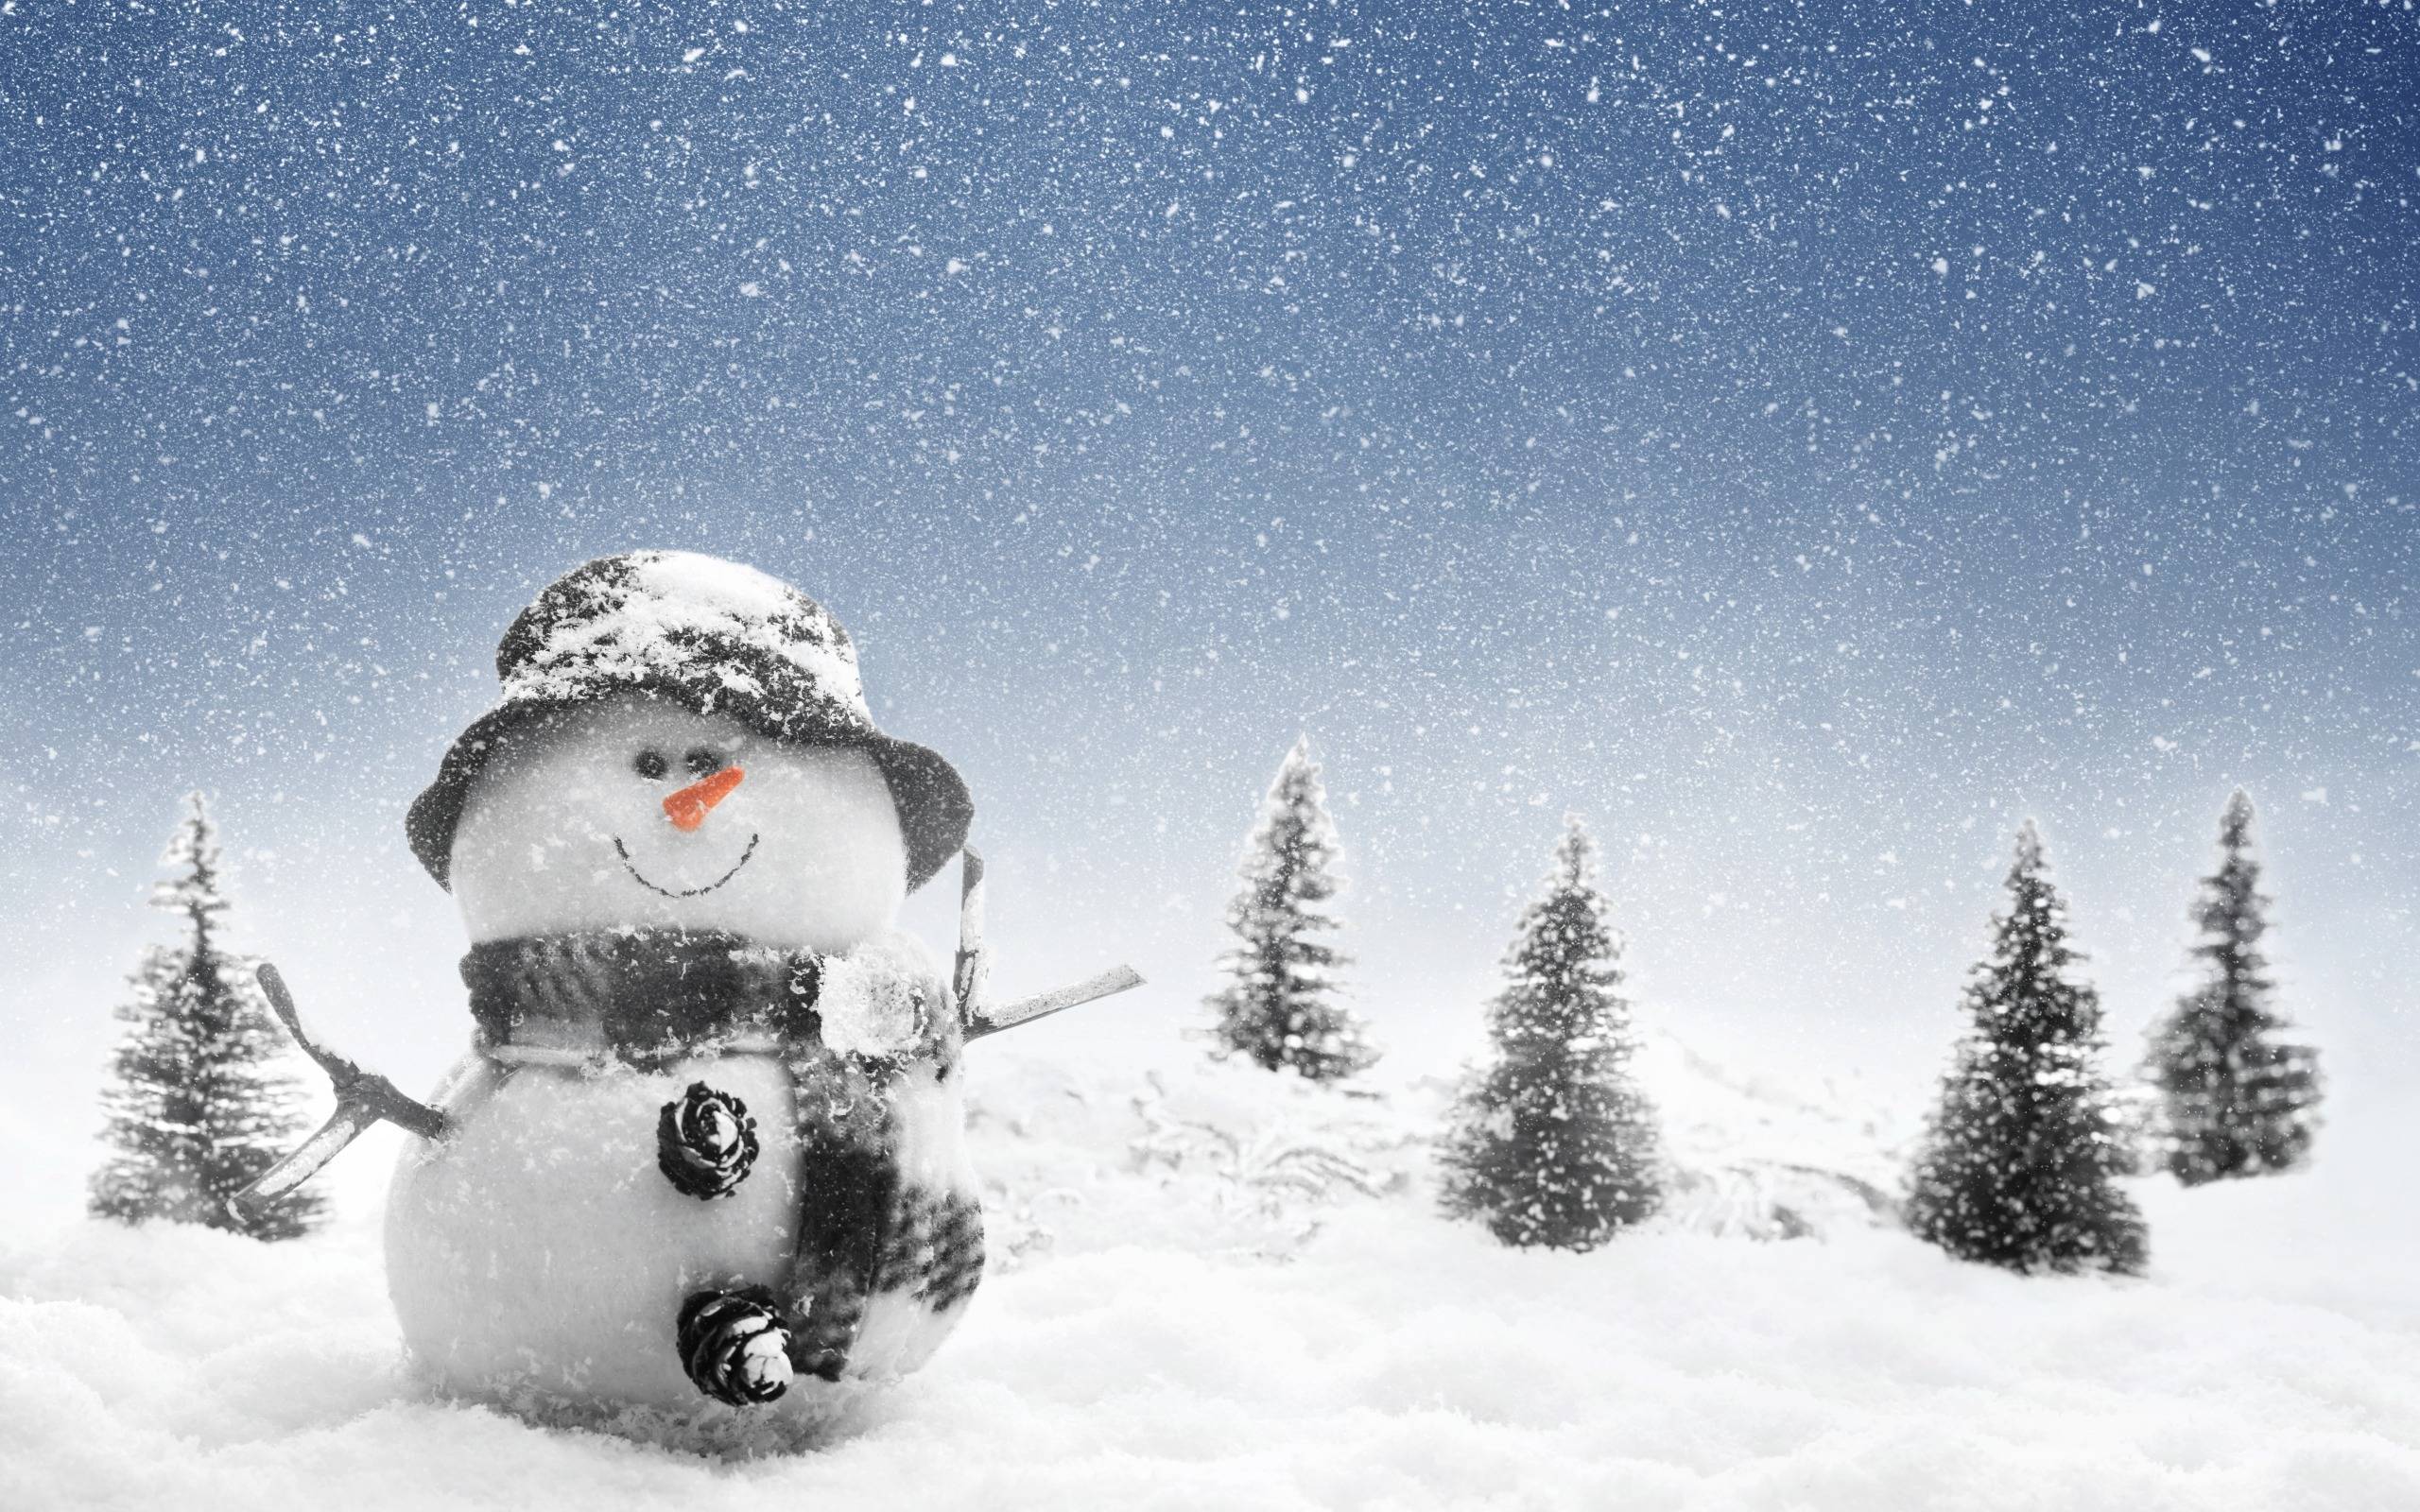 Snowman Wallpaper In Winter photo of Free Christmas Snowman